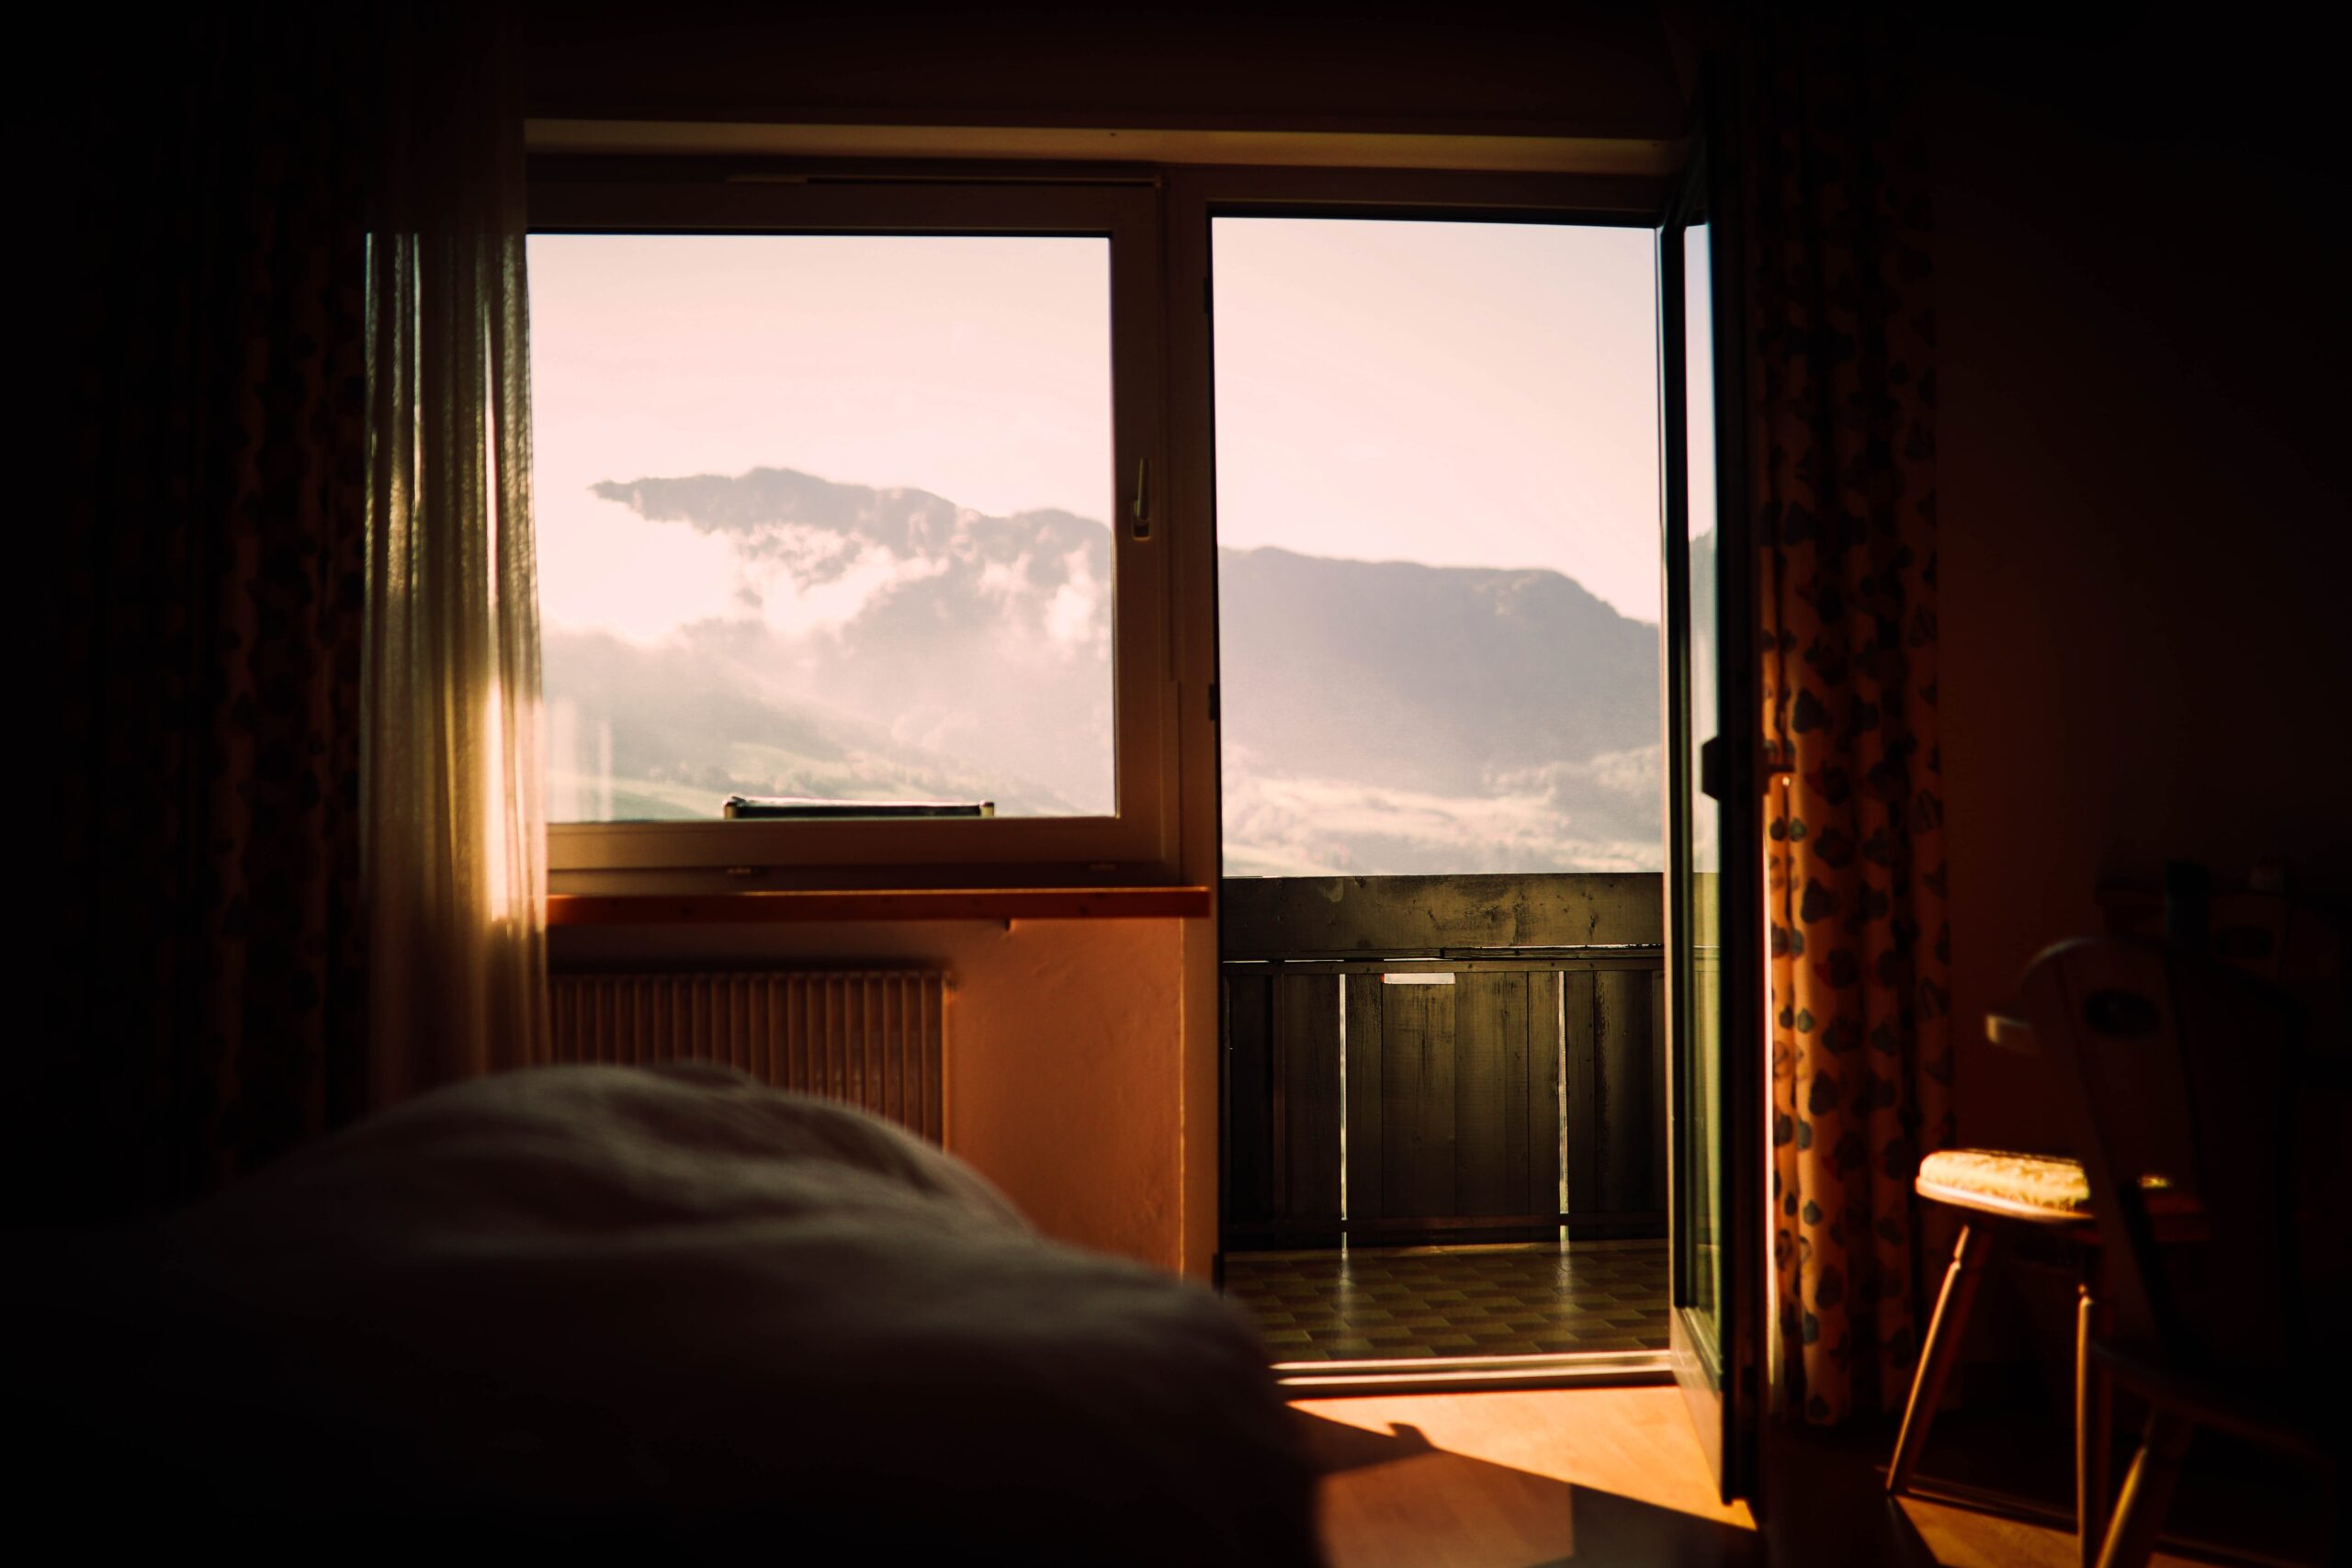 An Image of A room with a mountain view and sunlight seeping in